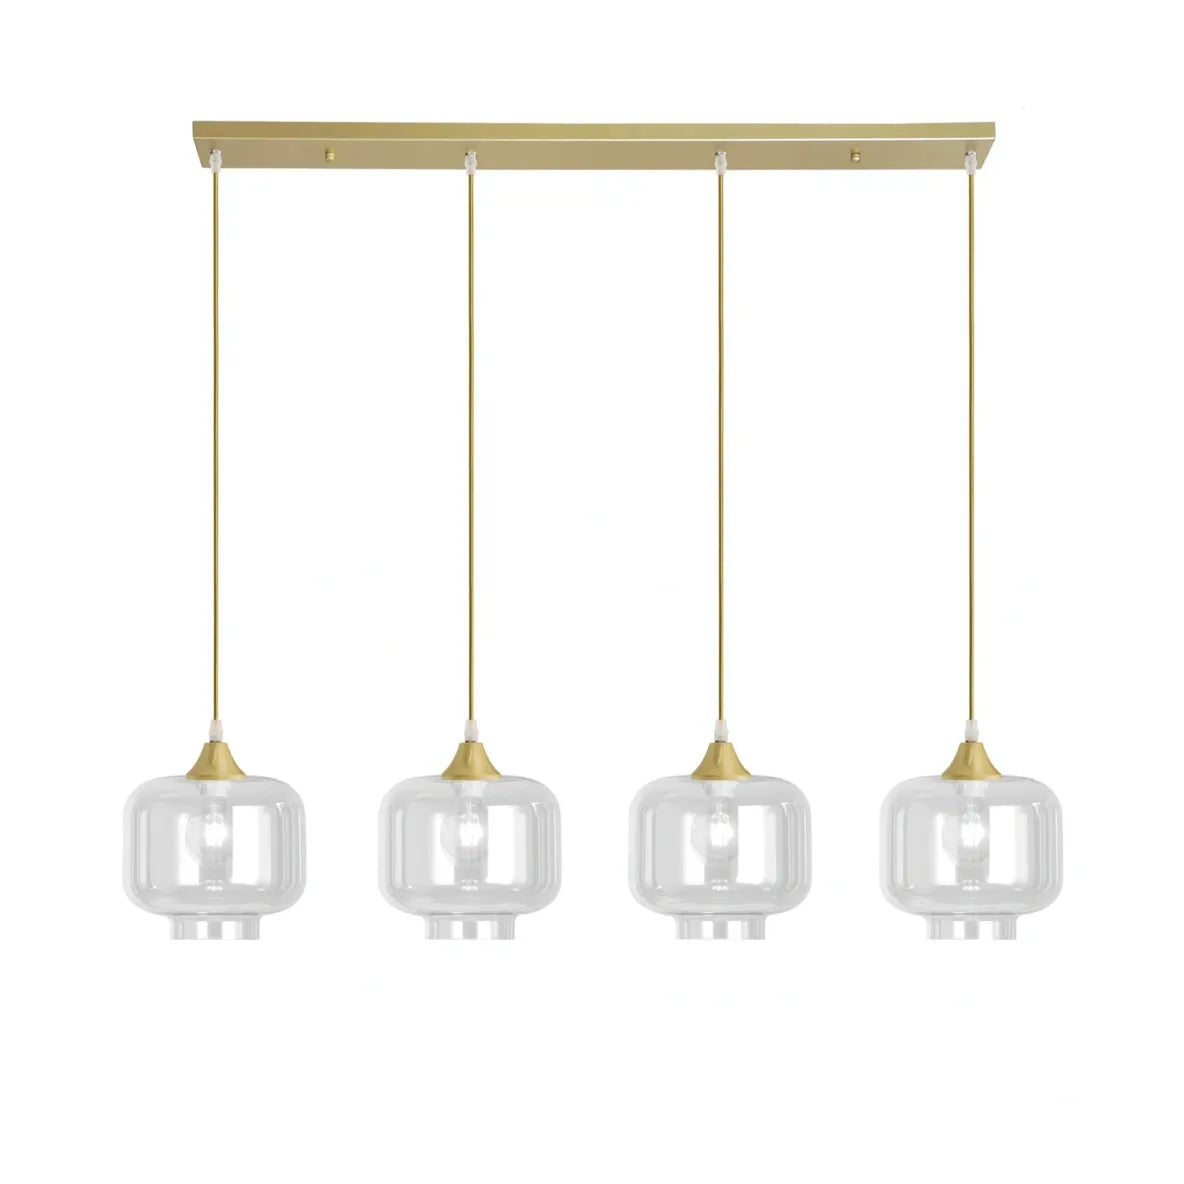 Murano 4 Light Gold Bar with 4 Round Glass shades